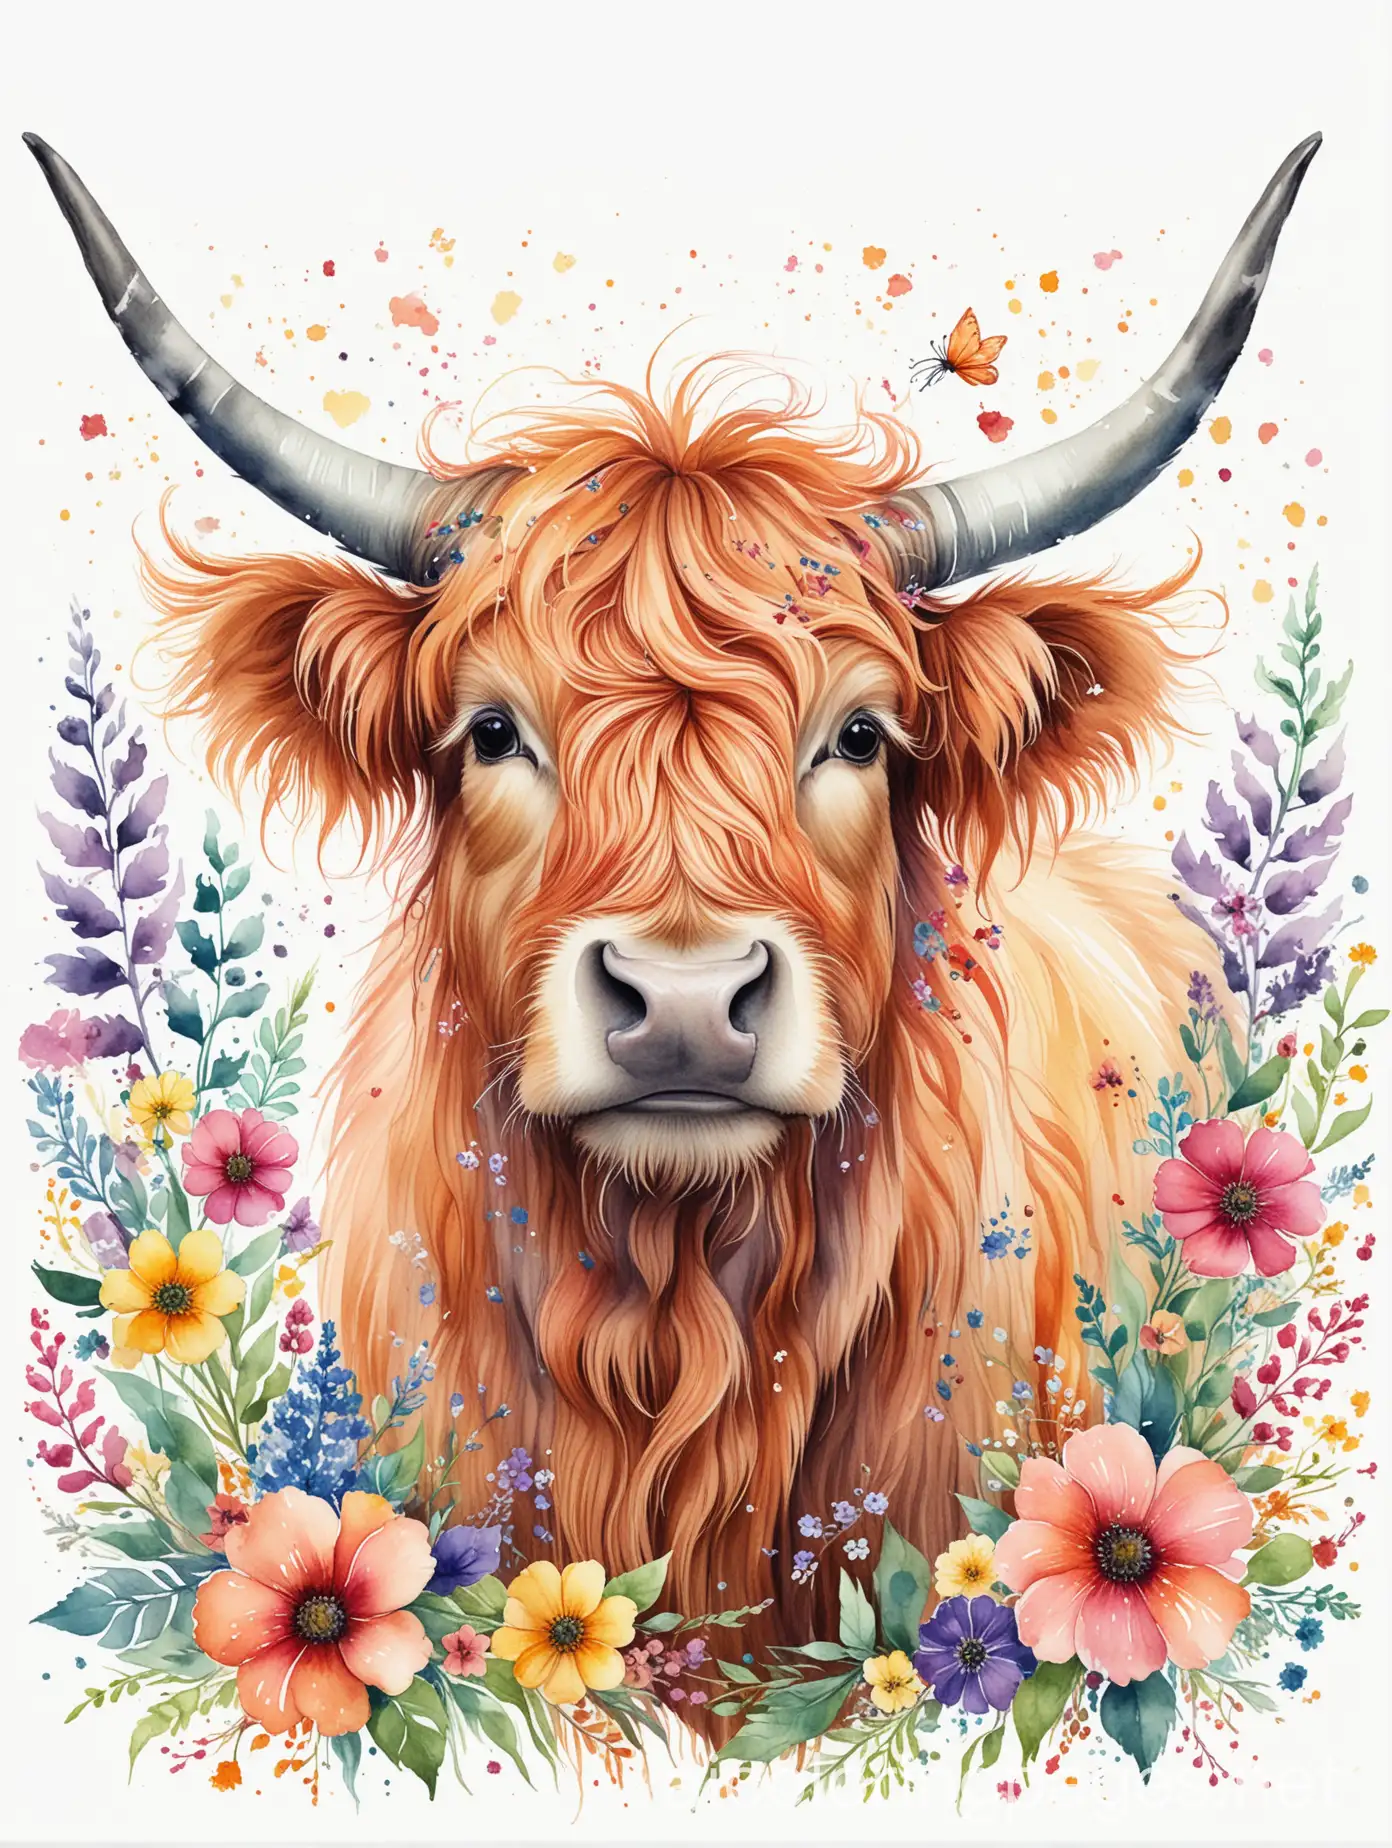 Whimsical highland cow illustration adorned with vibrant watercolor florals isolated on a white background, capturing the essence of springtime joy, artful graphic design, vibrant colors, joyful composition, Coloring Page, black and white, line art, white background, Simplicity, Ample White Space. The background of the coloring page is plain white to make it easy for young children to color within the lines. The outlines of all the subjects are easy to distinguish, making it simple for kids to color without too much difficulty